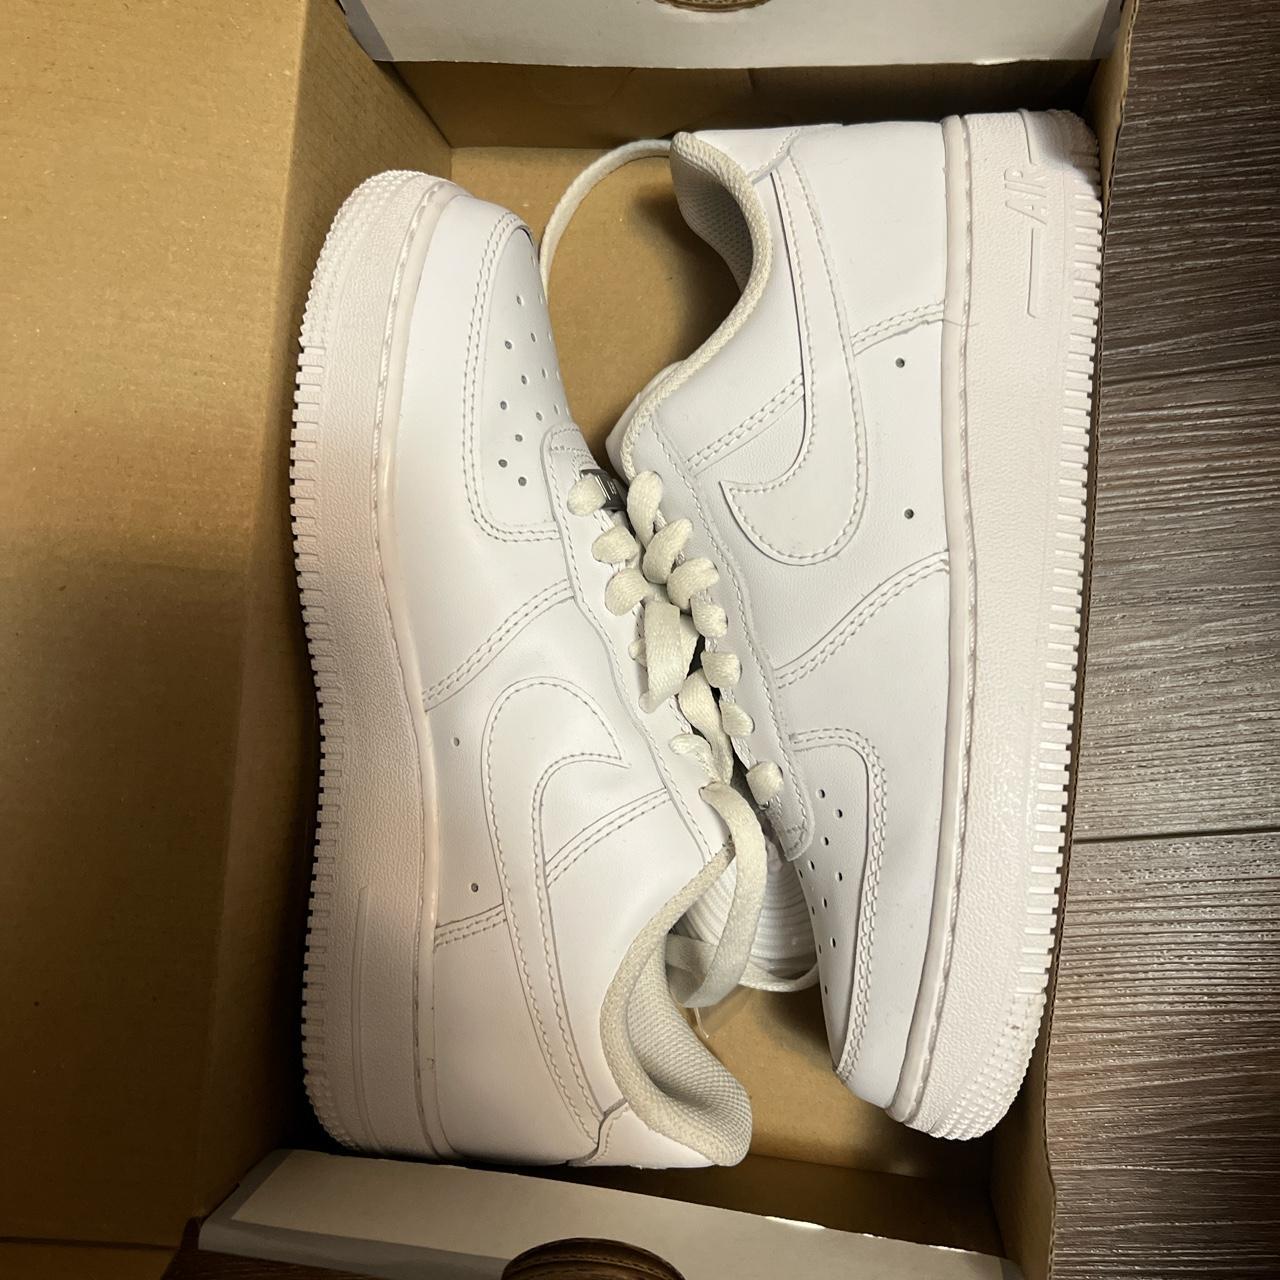 Nike Air Force One White with black or white laces - Depop